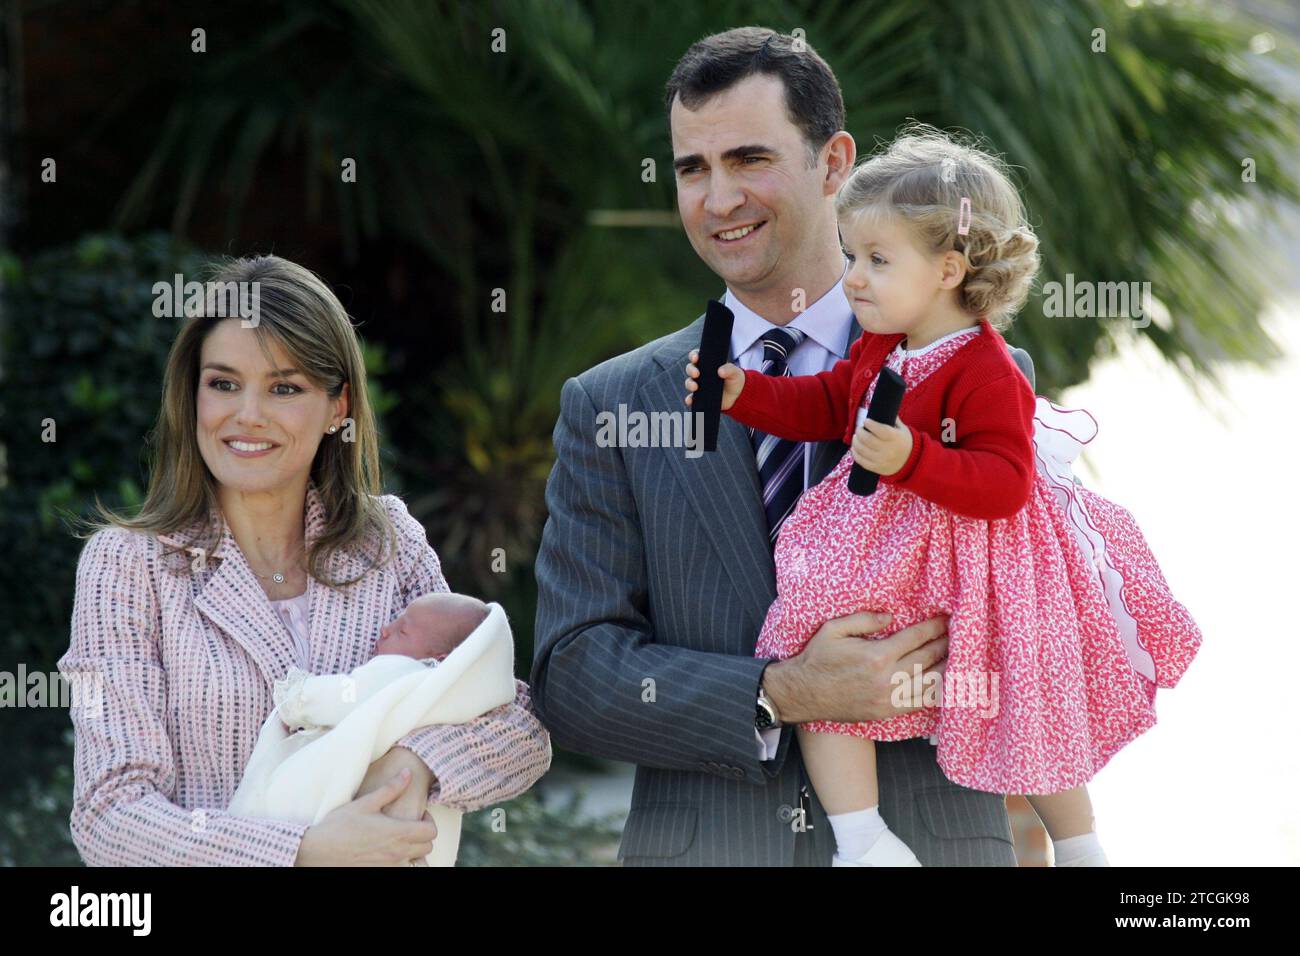 Madrid, 05/04/2007. Departure of the Princes of Asturias and their Daughters, the Infantas Leonor and Sofía, from the Ruber clinic. Photo: Francisco Seco, Chema Barroso, Jaime Garcia. Archdc. Credit: Album / Archivo ABC / Jaime García Stock Photo